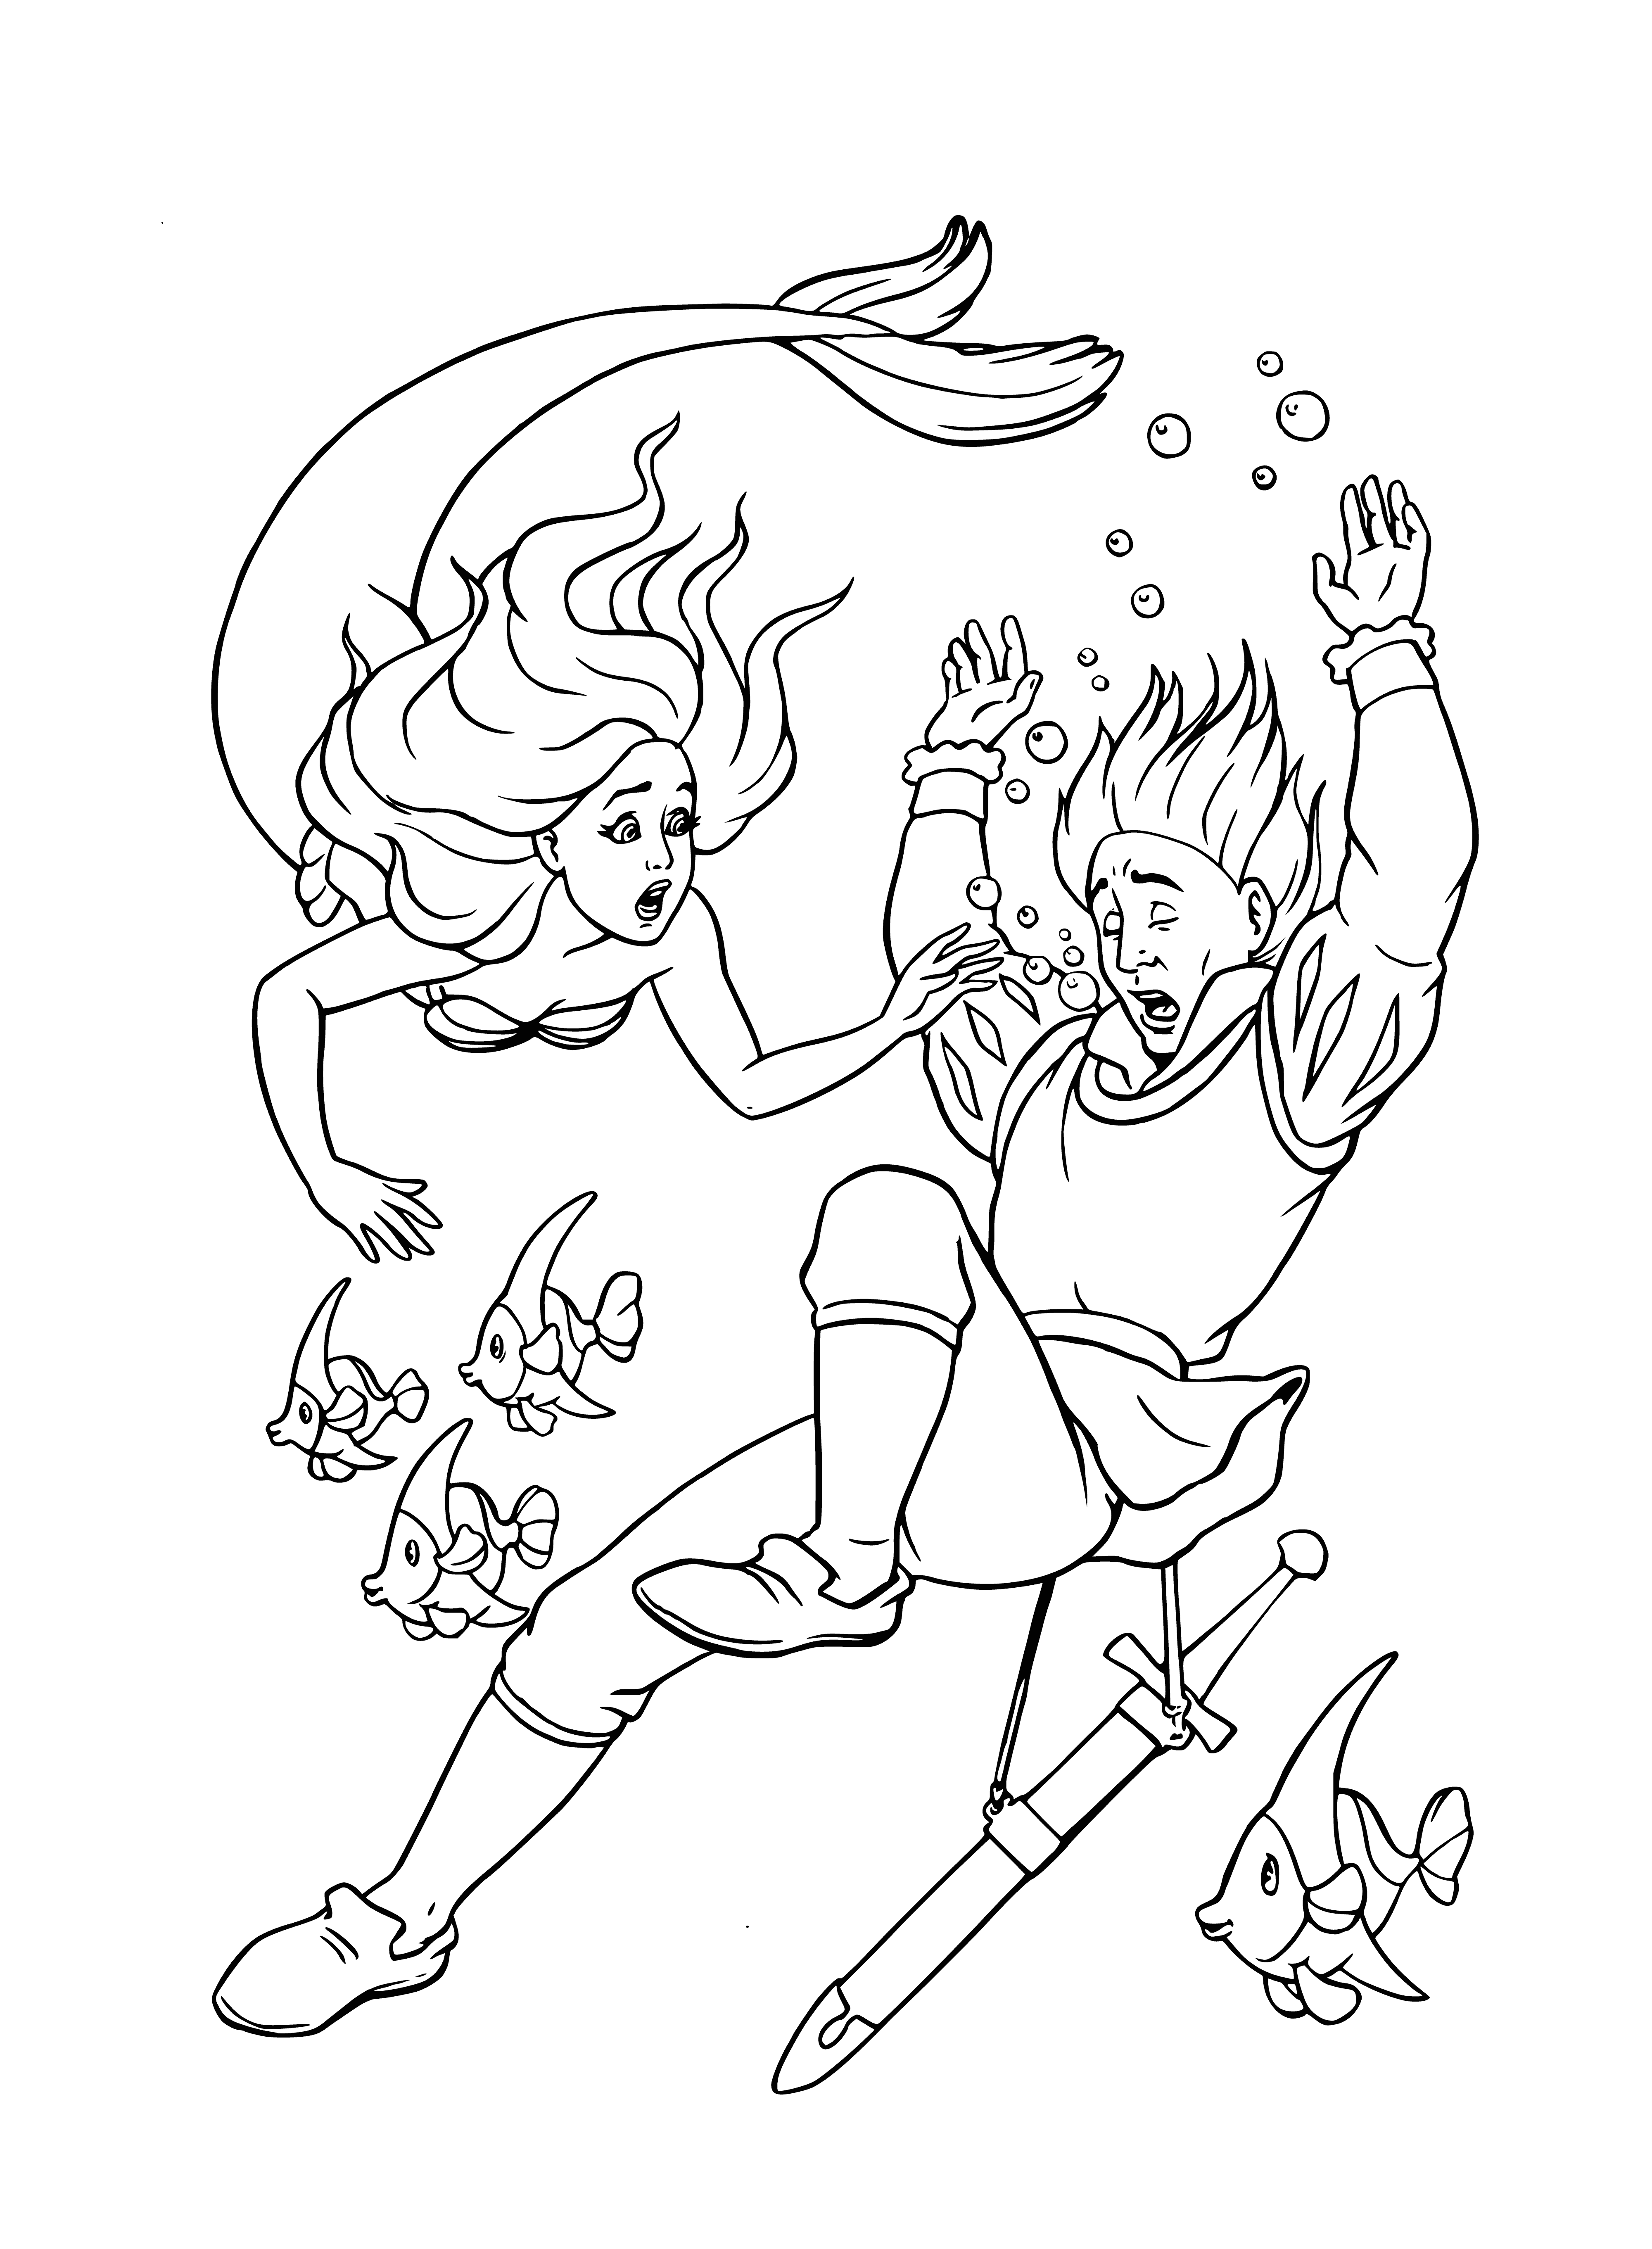 coloring page: Man in coloring page is Hans Christian Andersen writing "The Tales of Hans Christian Andersen" - abt prince who's drowning.